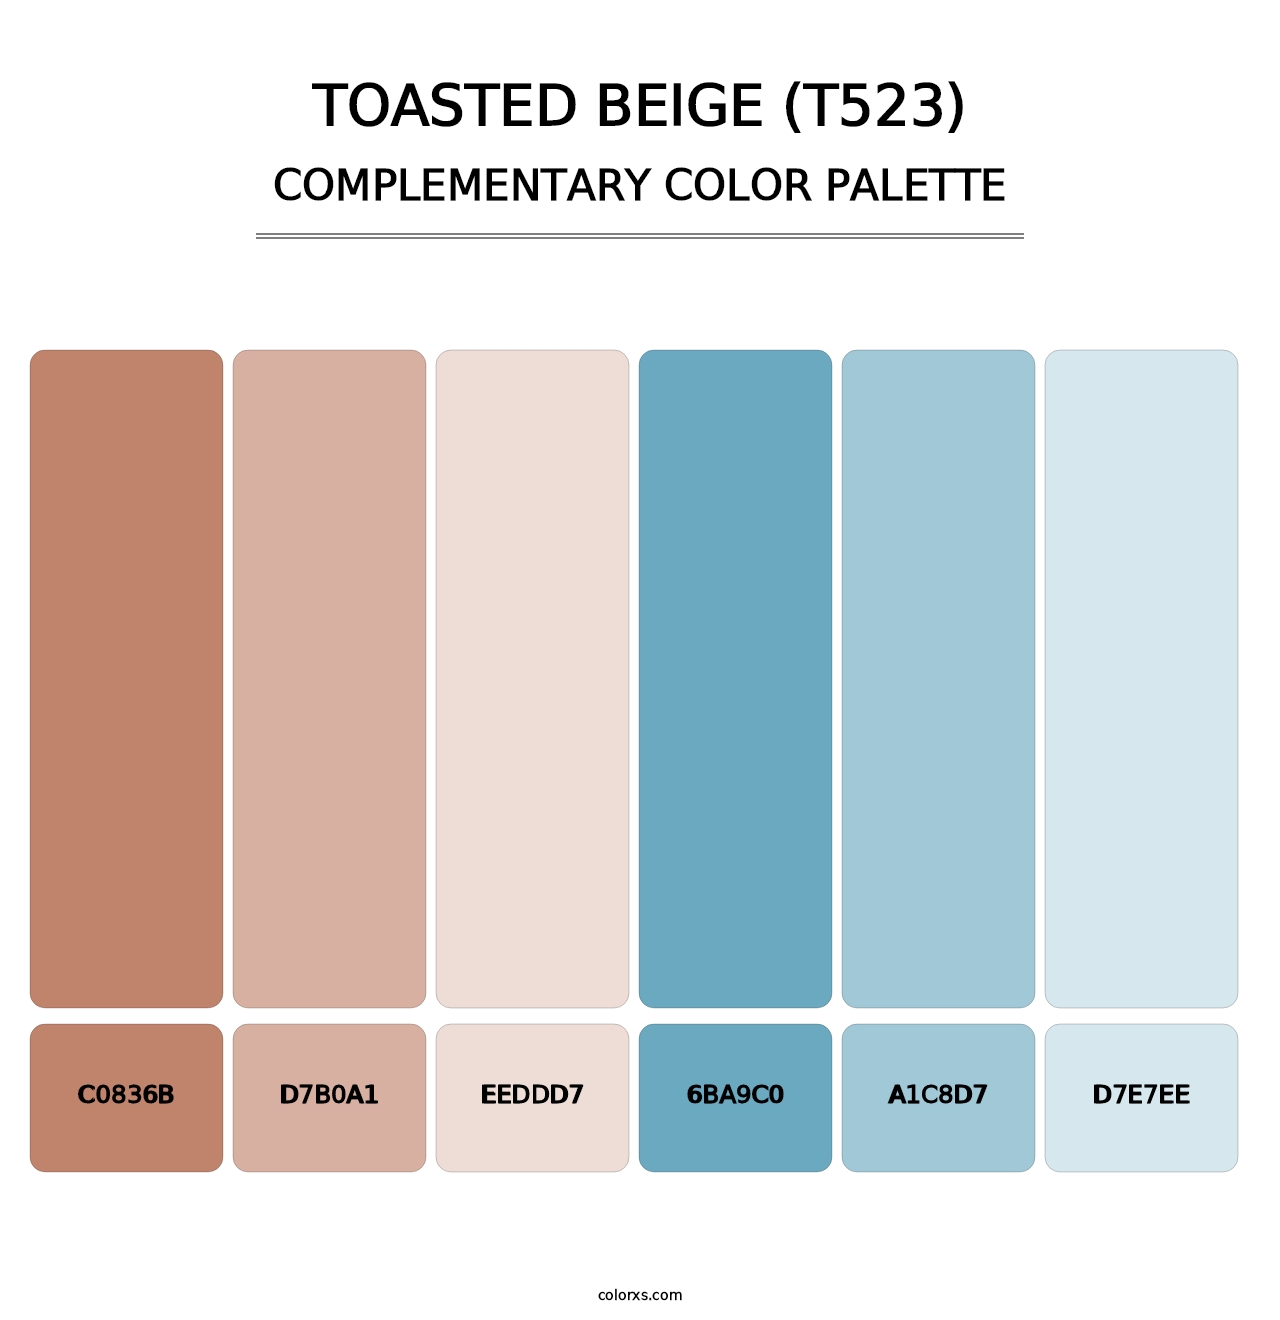 Toasted Beige (T523) - Complementary Color Palette